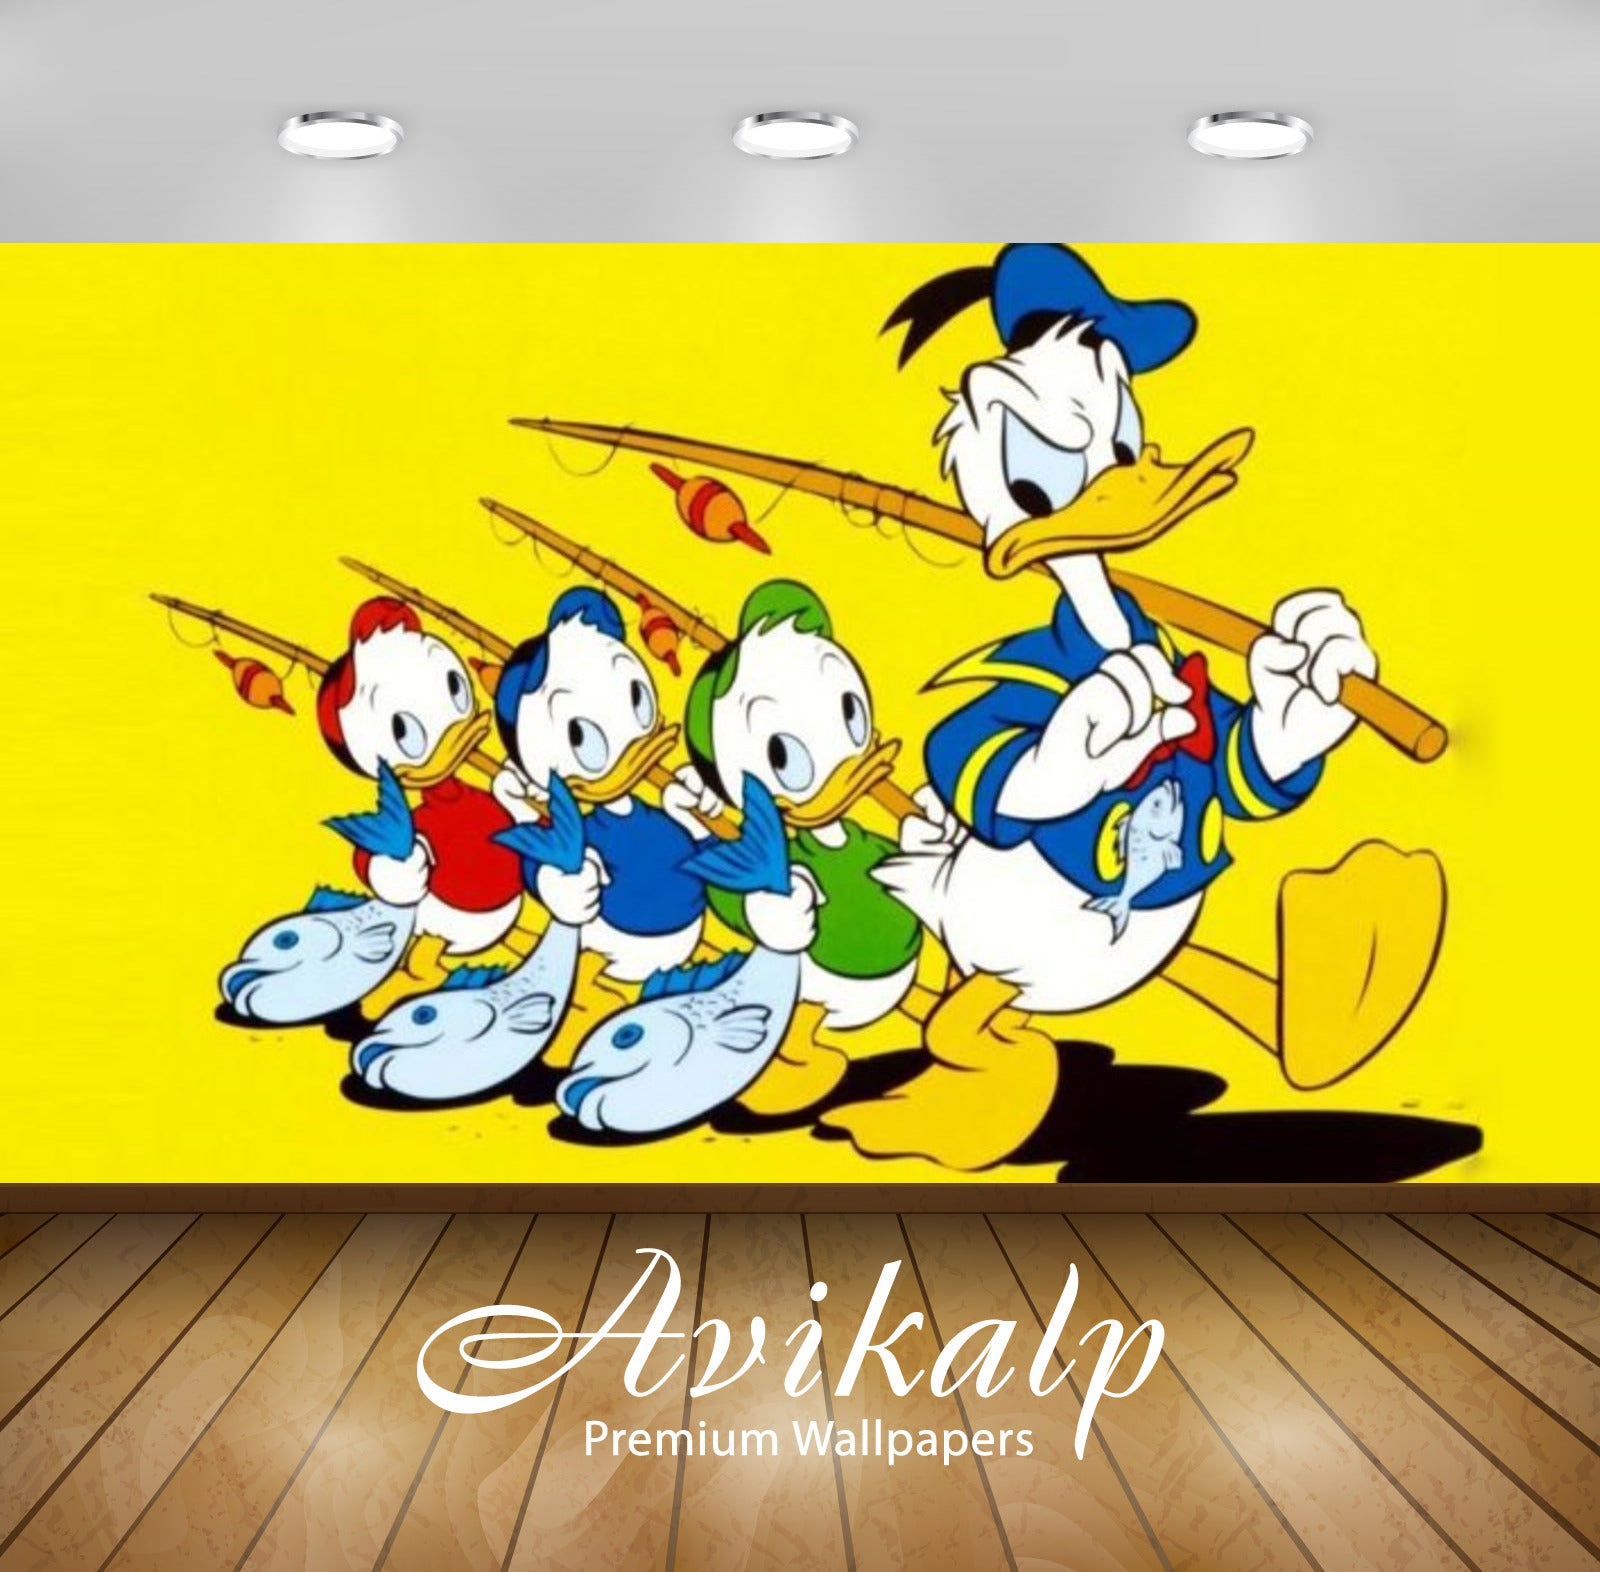 Avikalp Exclusive Awi2076 Donald Duck Fishing Fun Game For Kids  Full HD Wallpapers for Living room,